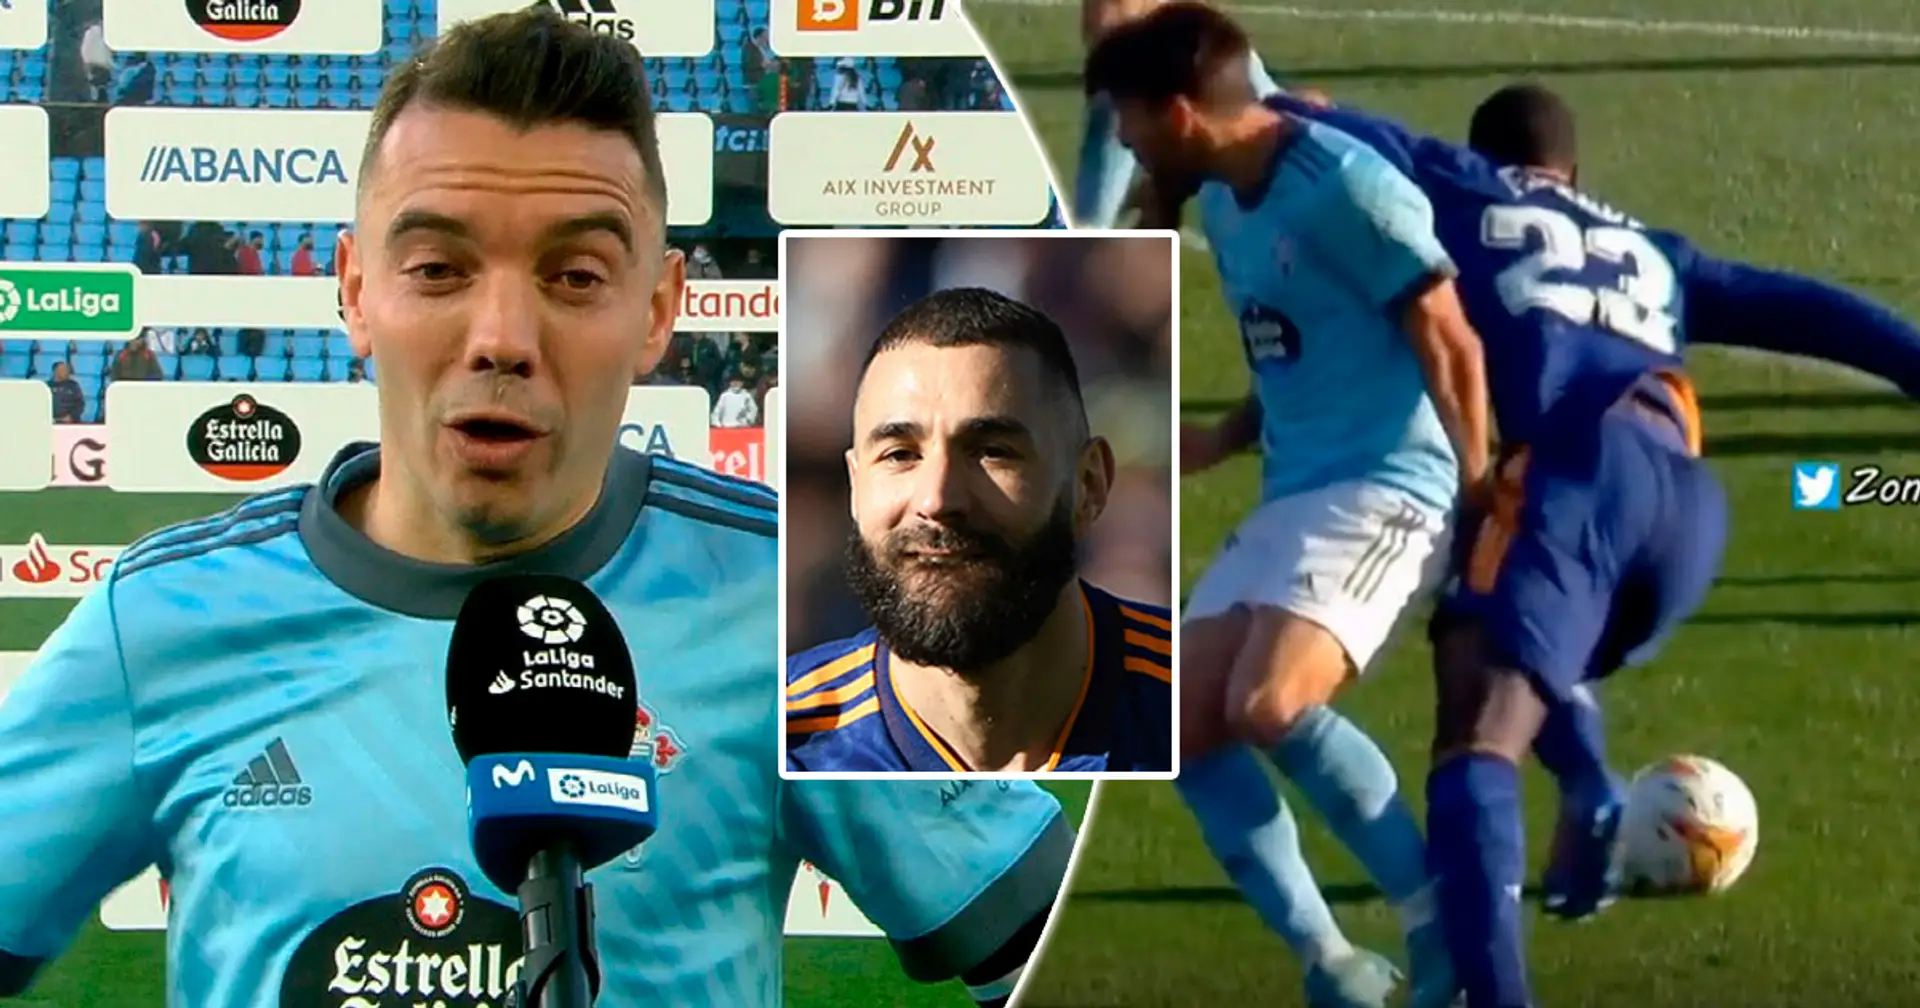 'The only thing missing was for the referee to take it': Iago Aspas slams referee for awarding Real Madrid 3 penalties vs Celta Vigo